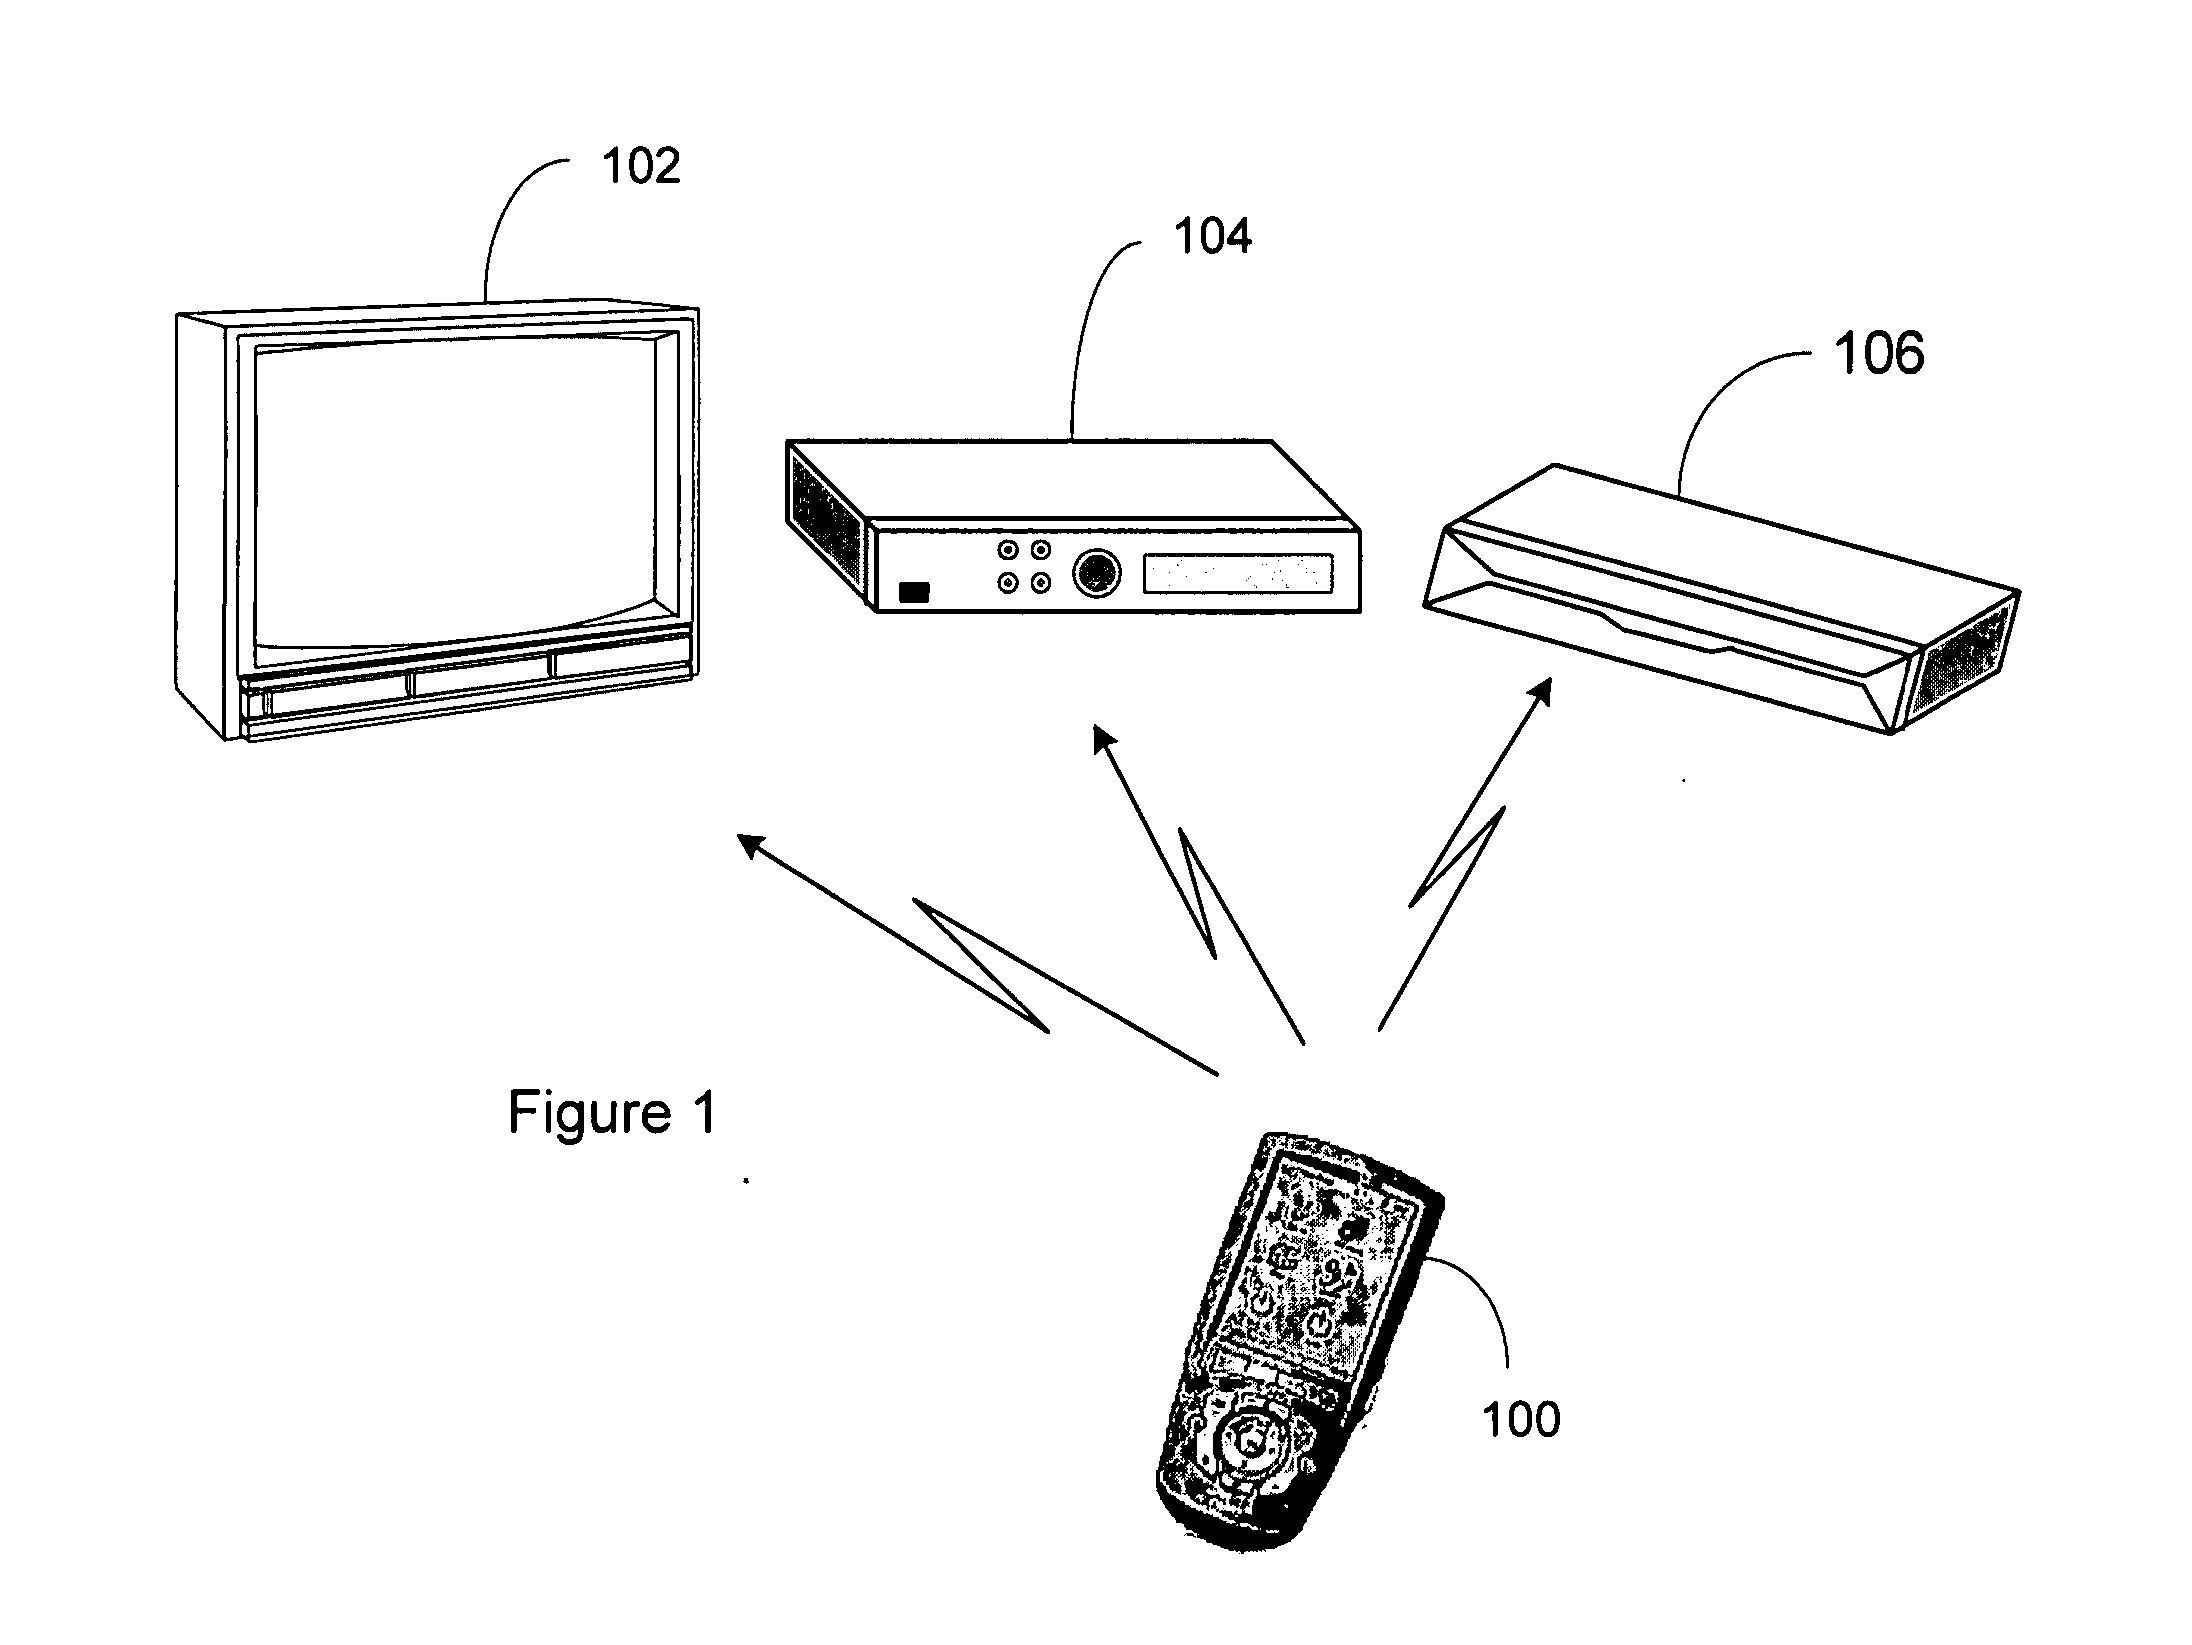 System and method for using image data in connection with configuring a universal controlling device